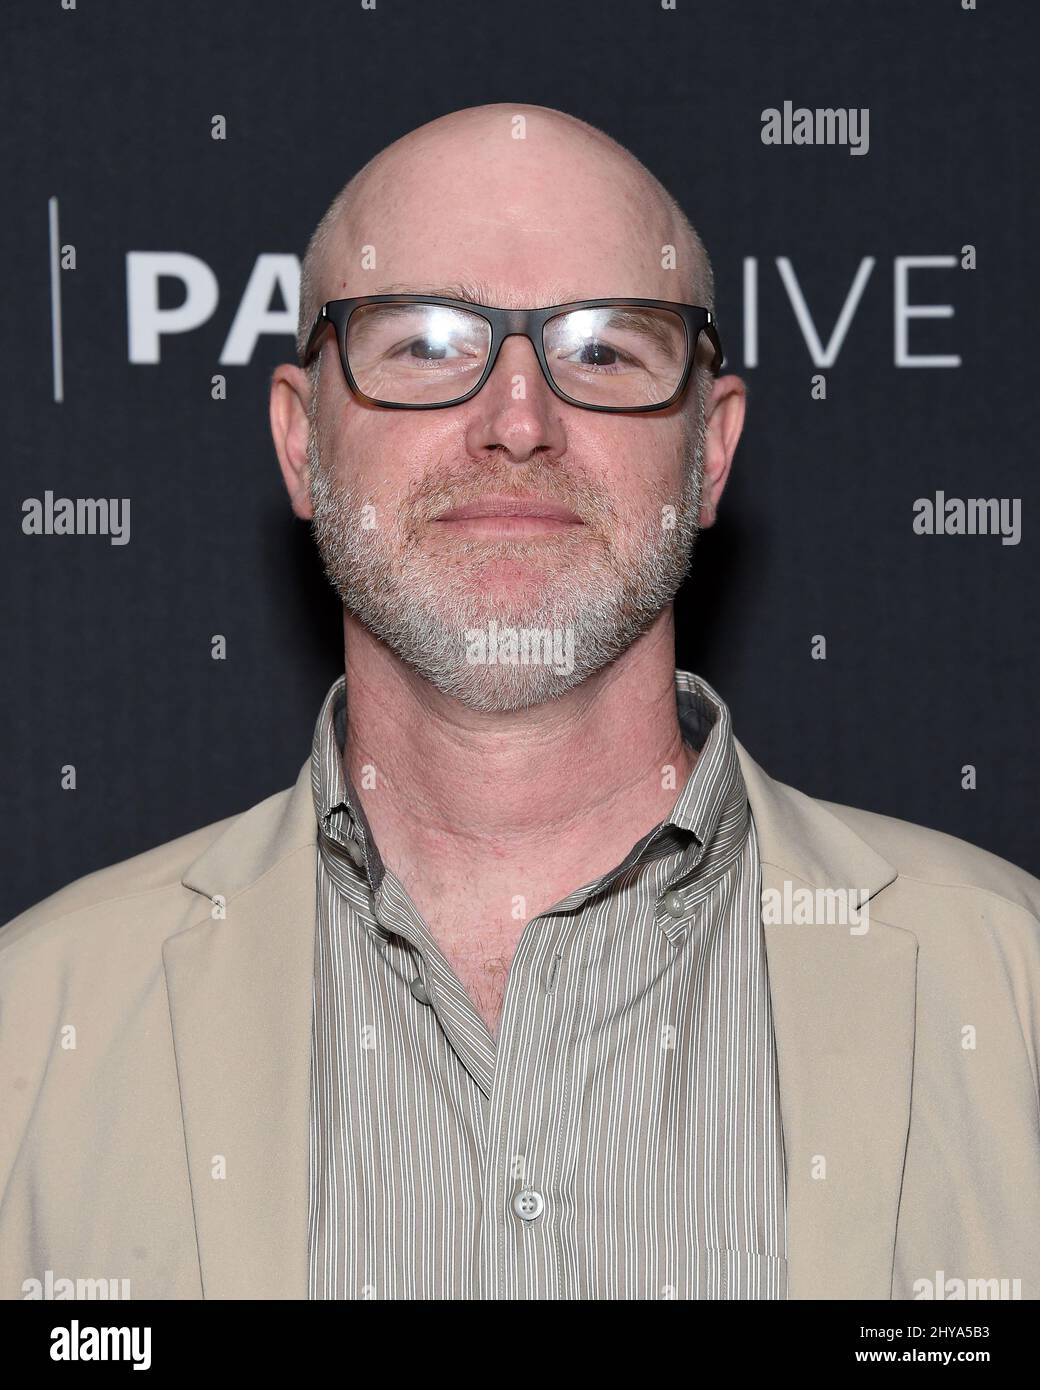 David Hollander attending PaleyLive LA: An Evening with Ray Donovan, held at the Paley Center for Media, inBeverly Hills, California. Stock Photo